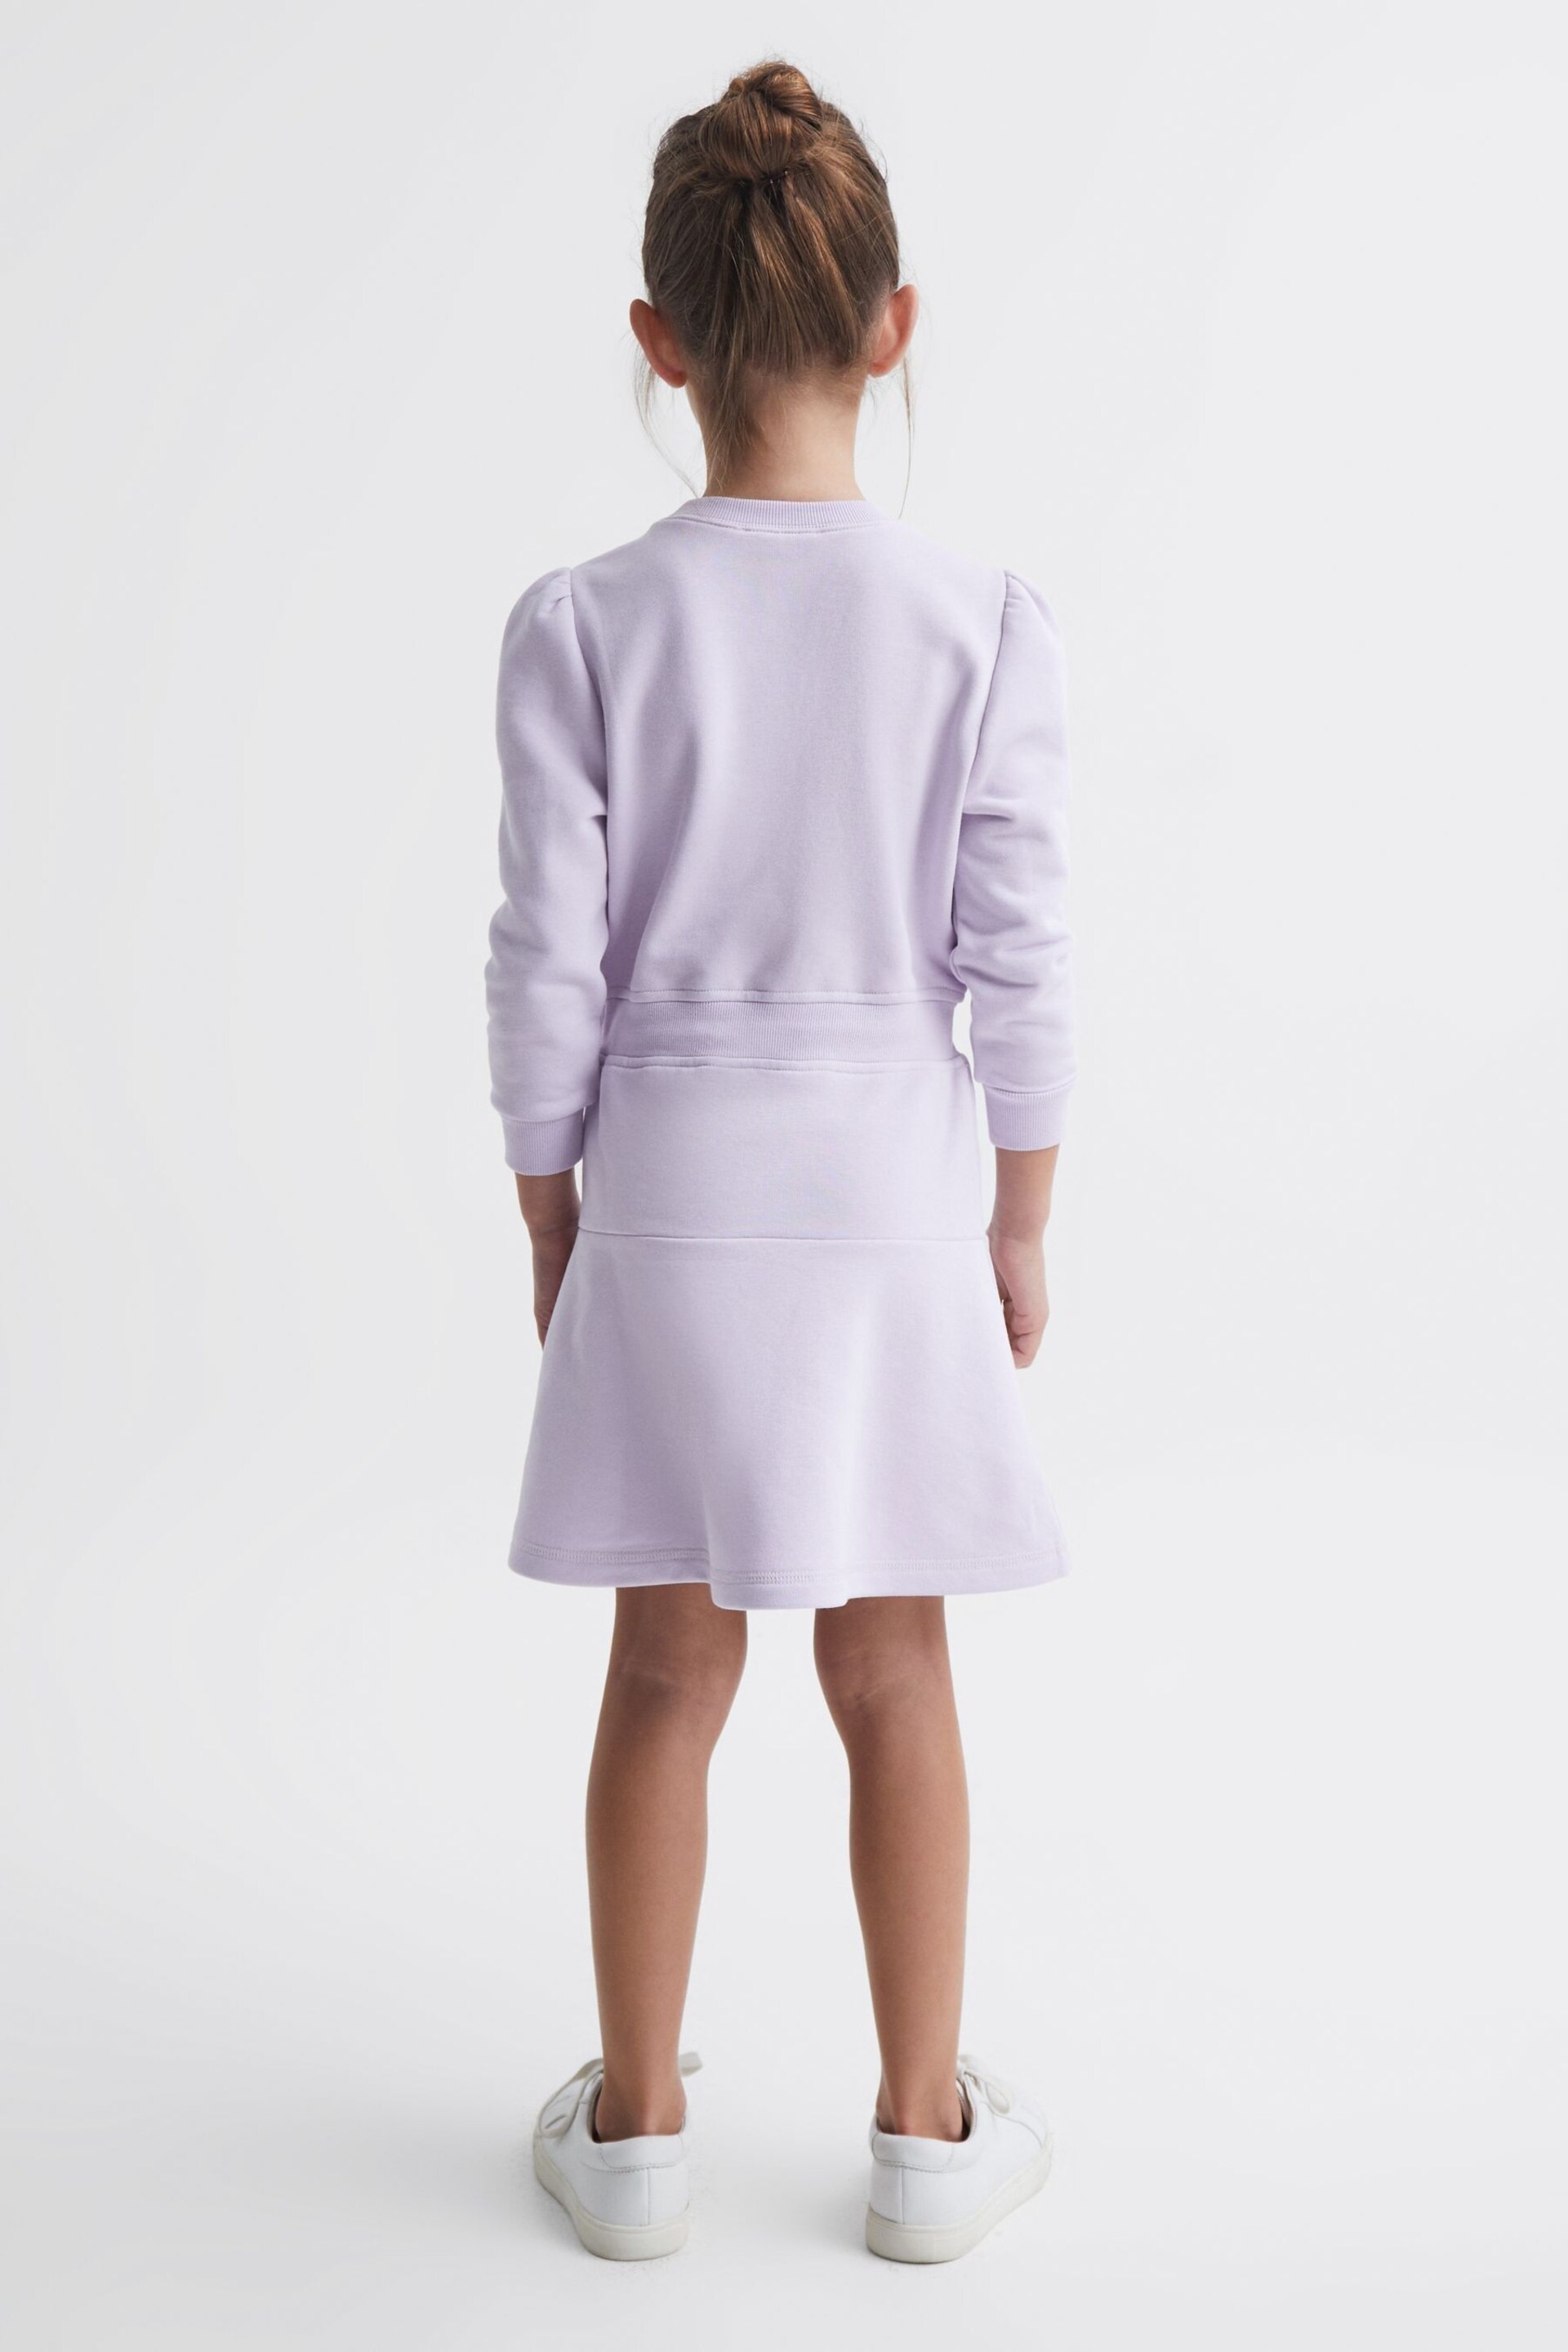 Reiss Lilac Maeve Junior Relaxed Jersey Dress - Image 5 of 7